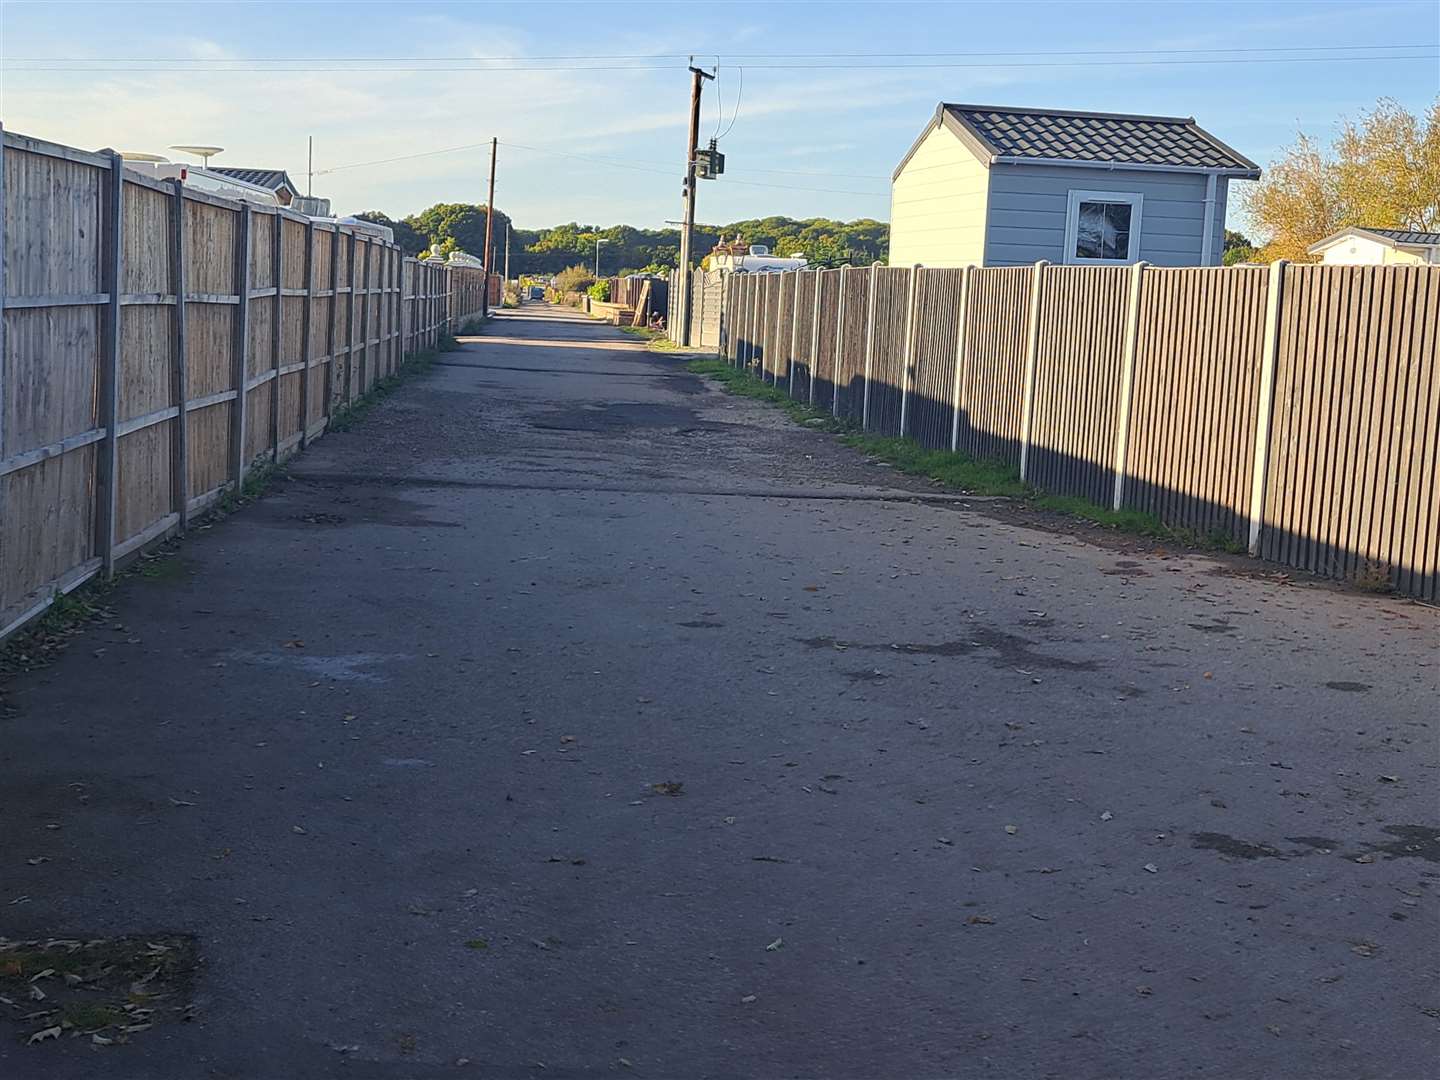 The entrance to The Meadows gypsy traveller site in Lenham Road